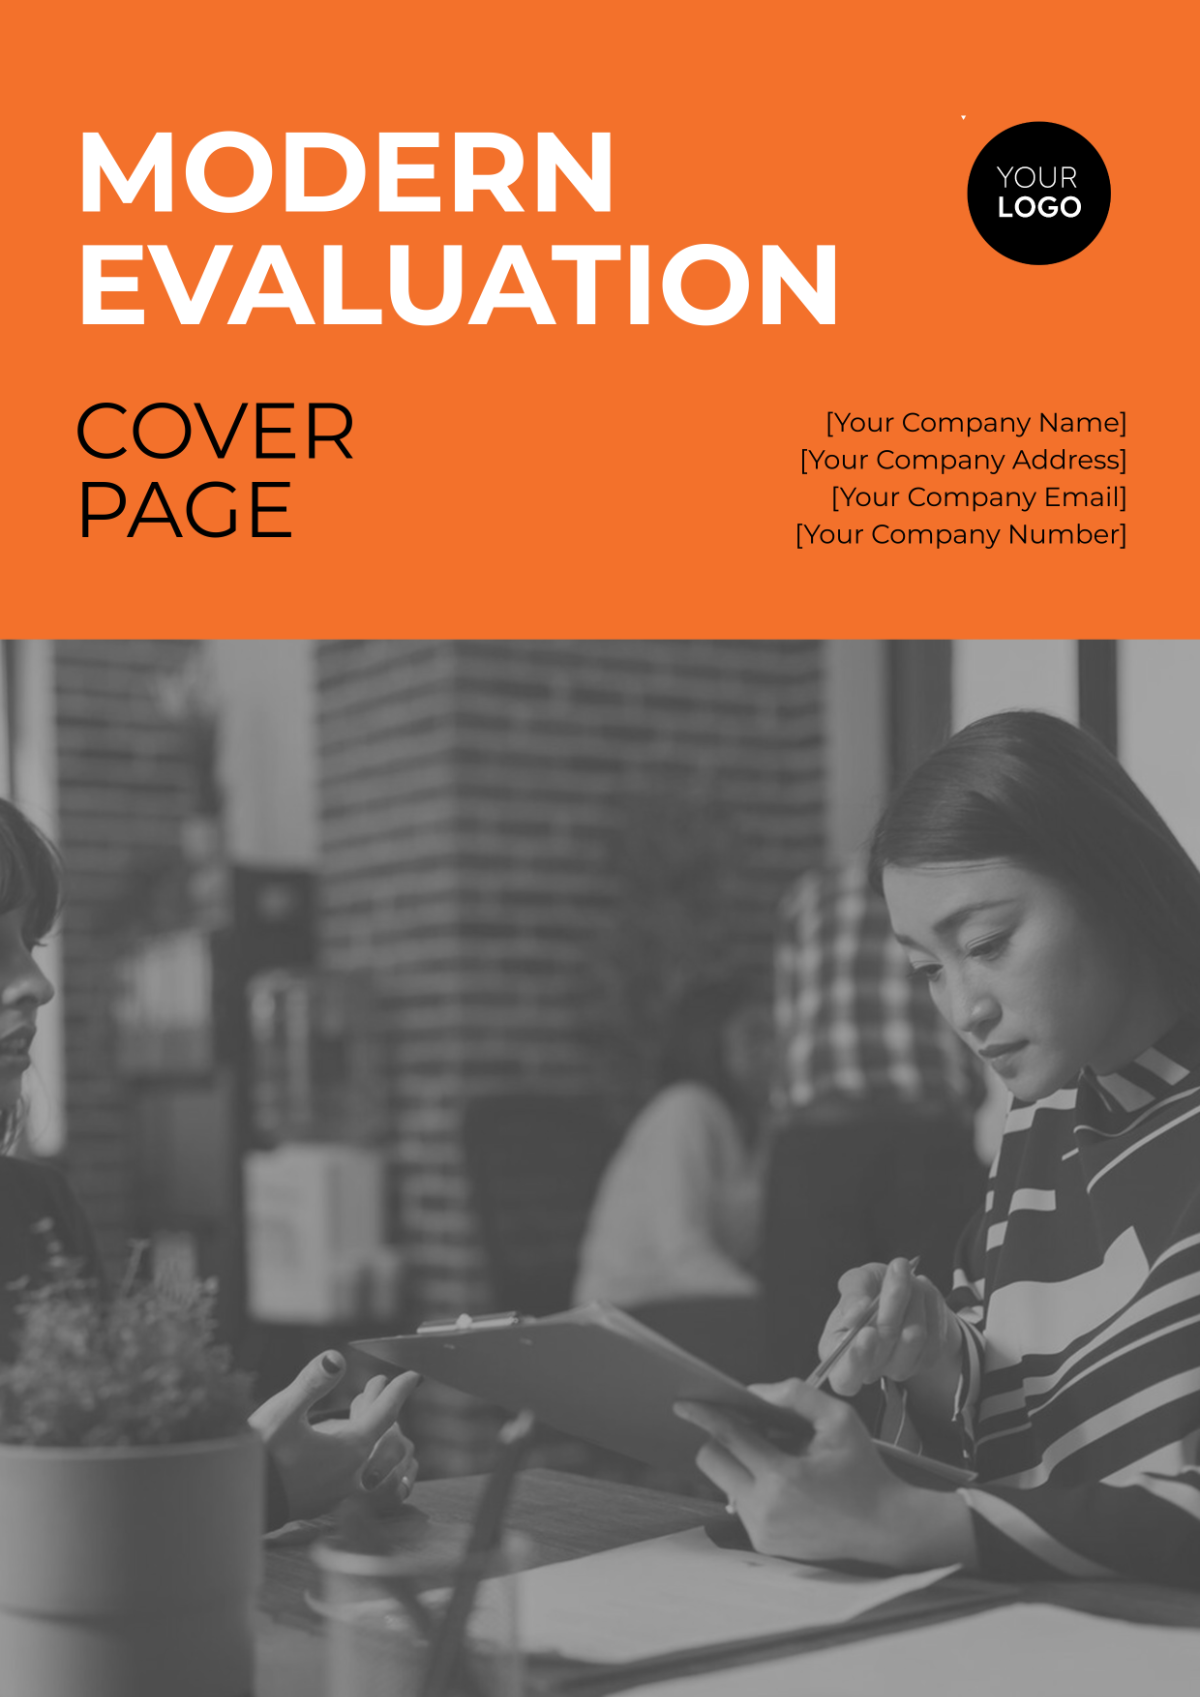 Modern Evaluation Cover Page